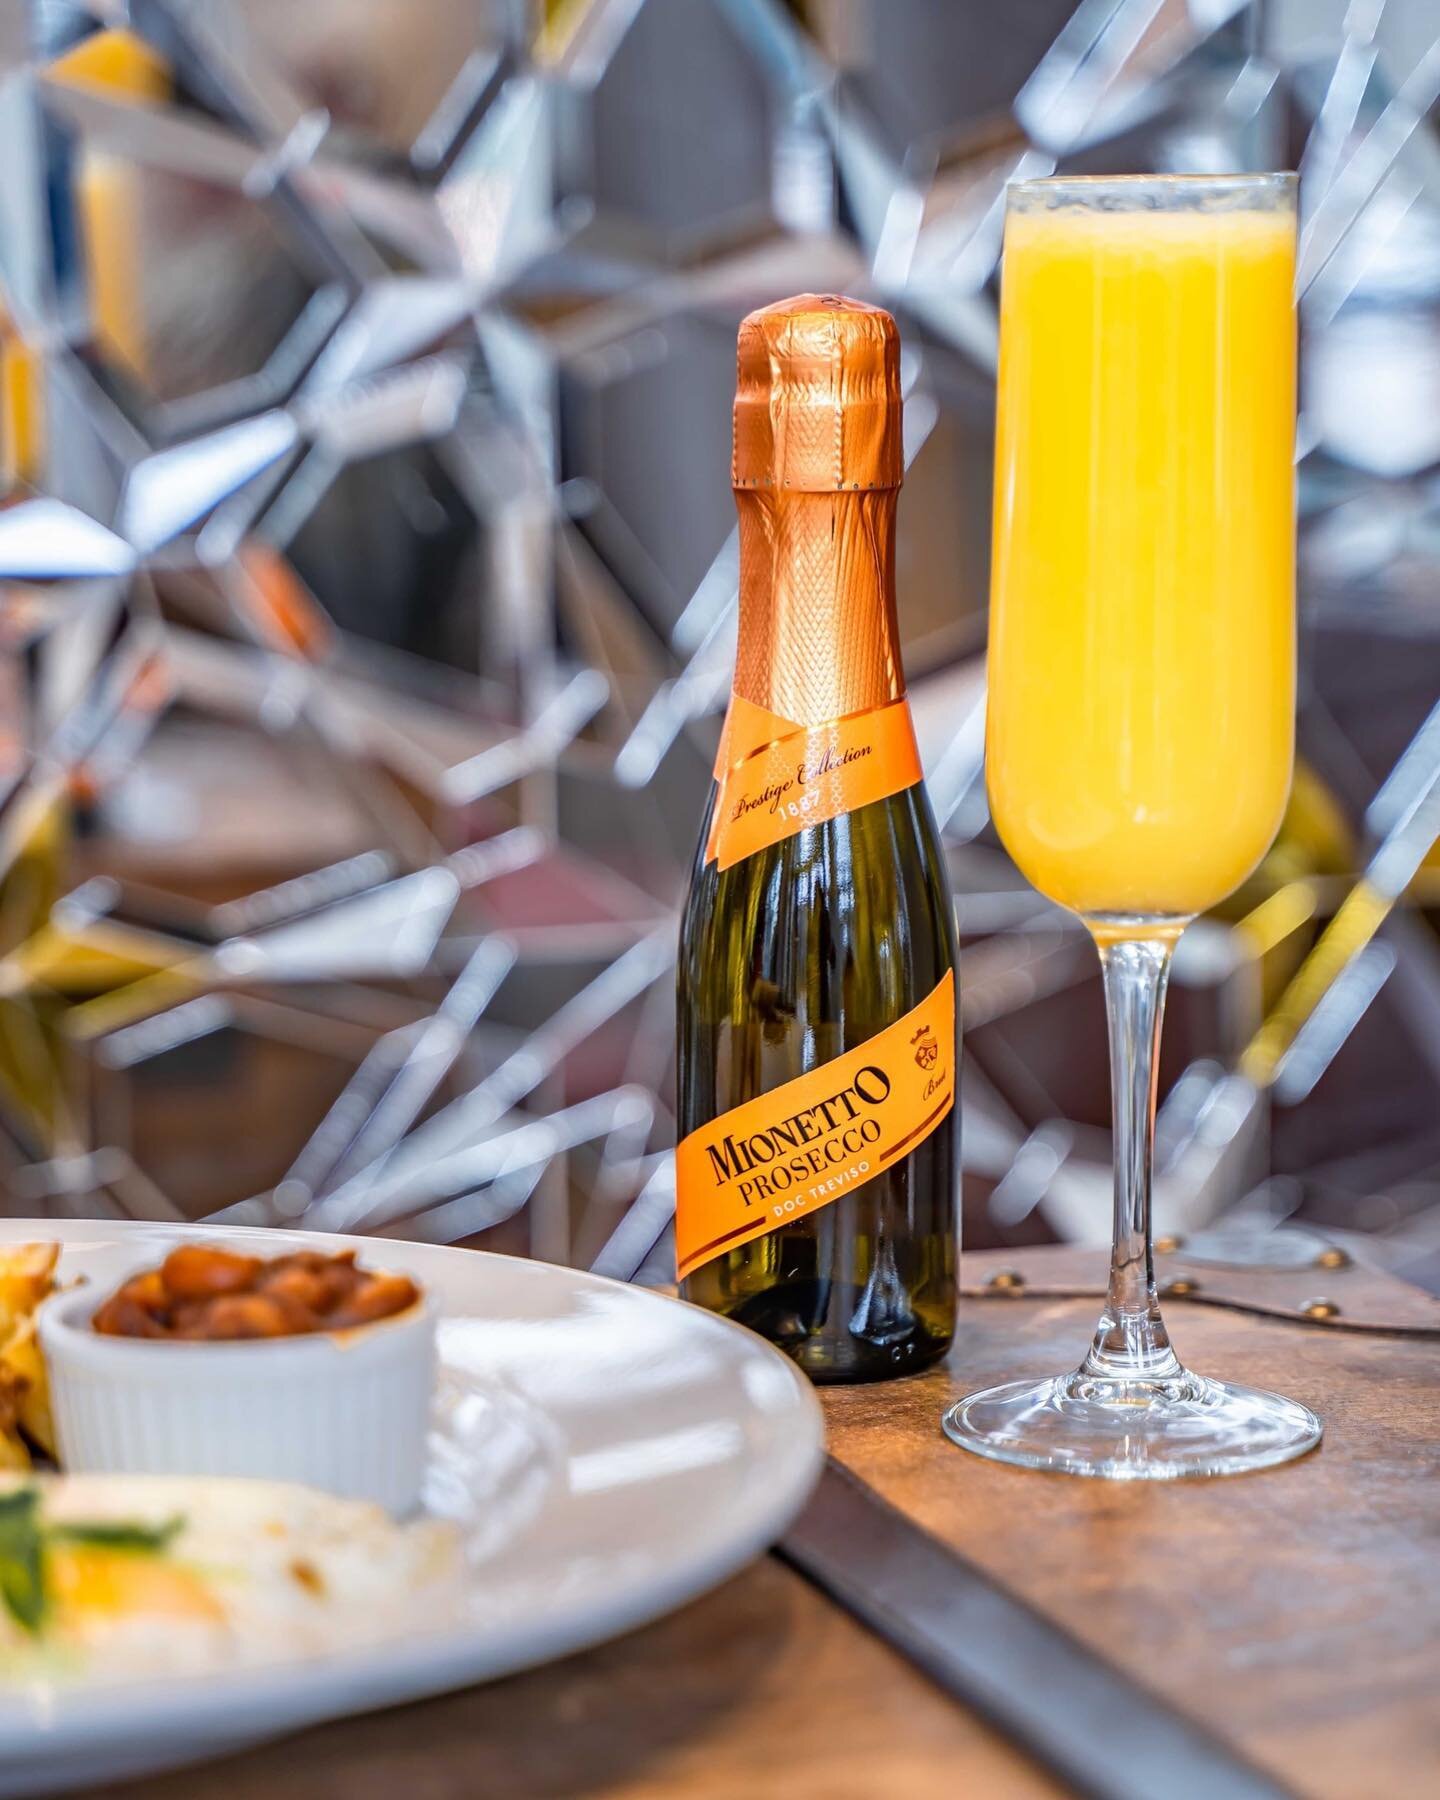 Brunch is the most social meal of the week, specially when it involves mimosa flights. Join us Saturday &amp; Sunday between 10am and 3pm with family and friends and let us take care of everything so you can relax and unwind from the week. 

If you c